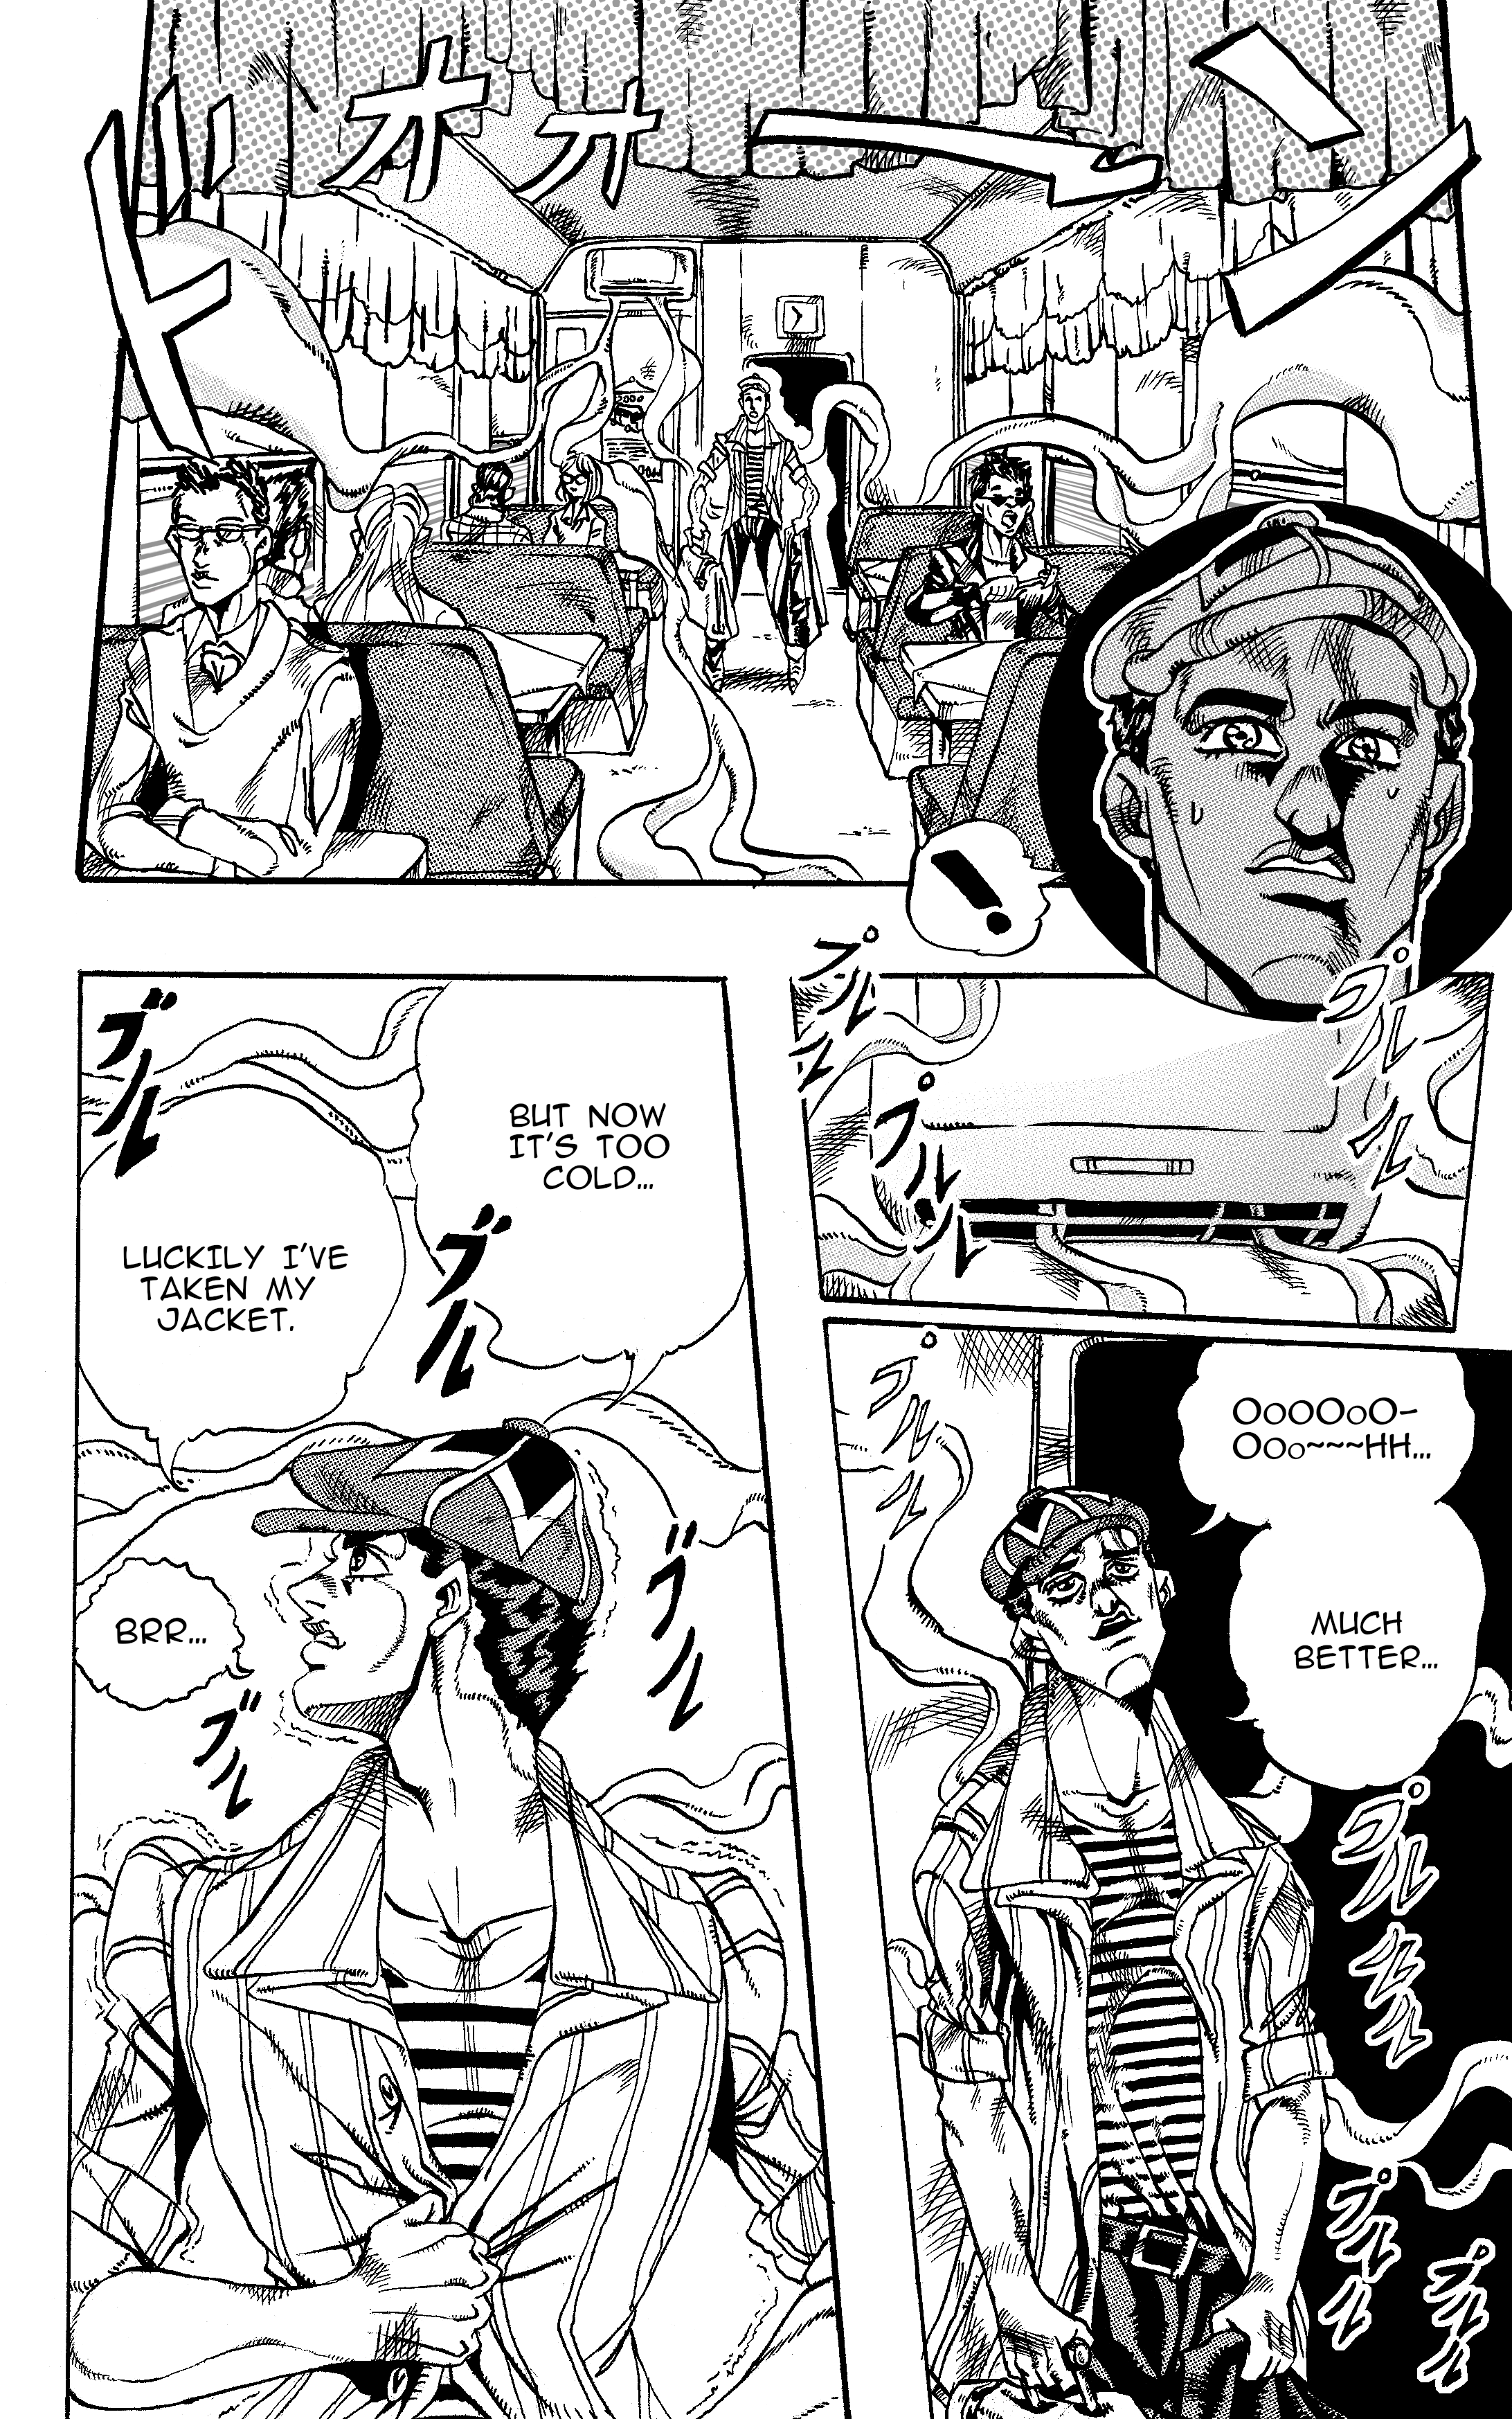 Jojo's Bizarre Adventure: Moscow Calling (Doujinshi) Vol.1 Chapter 6: This Train Is On Fire Part 1 - Picture 2